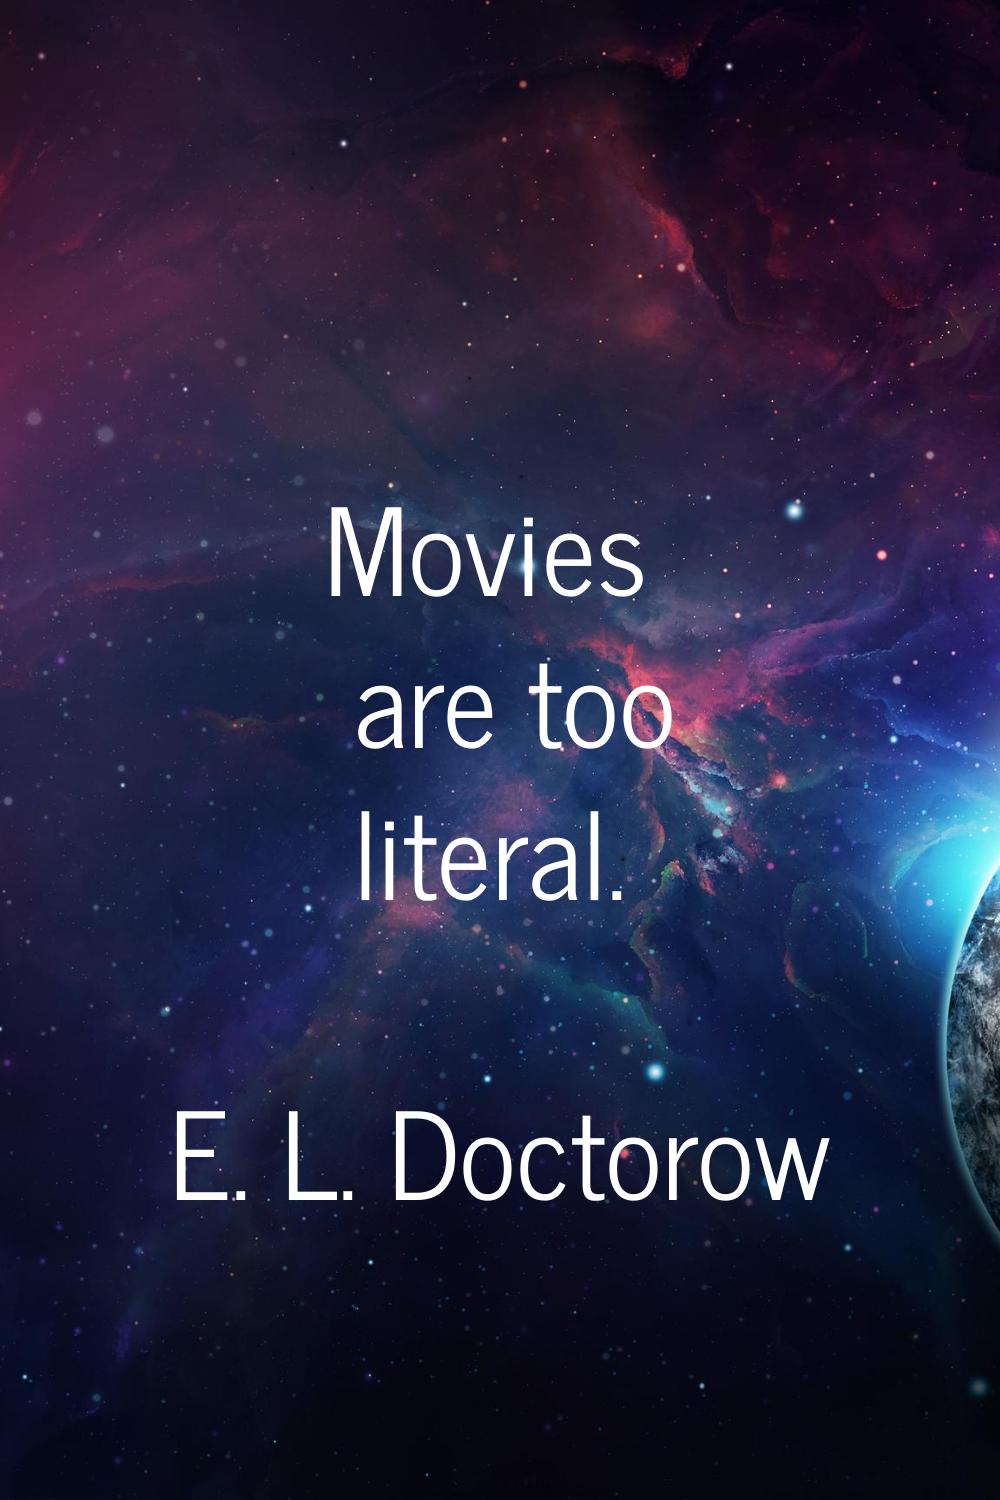 Movies are too literal.